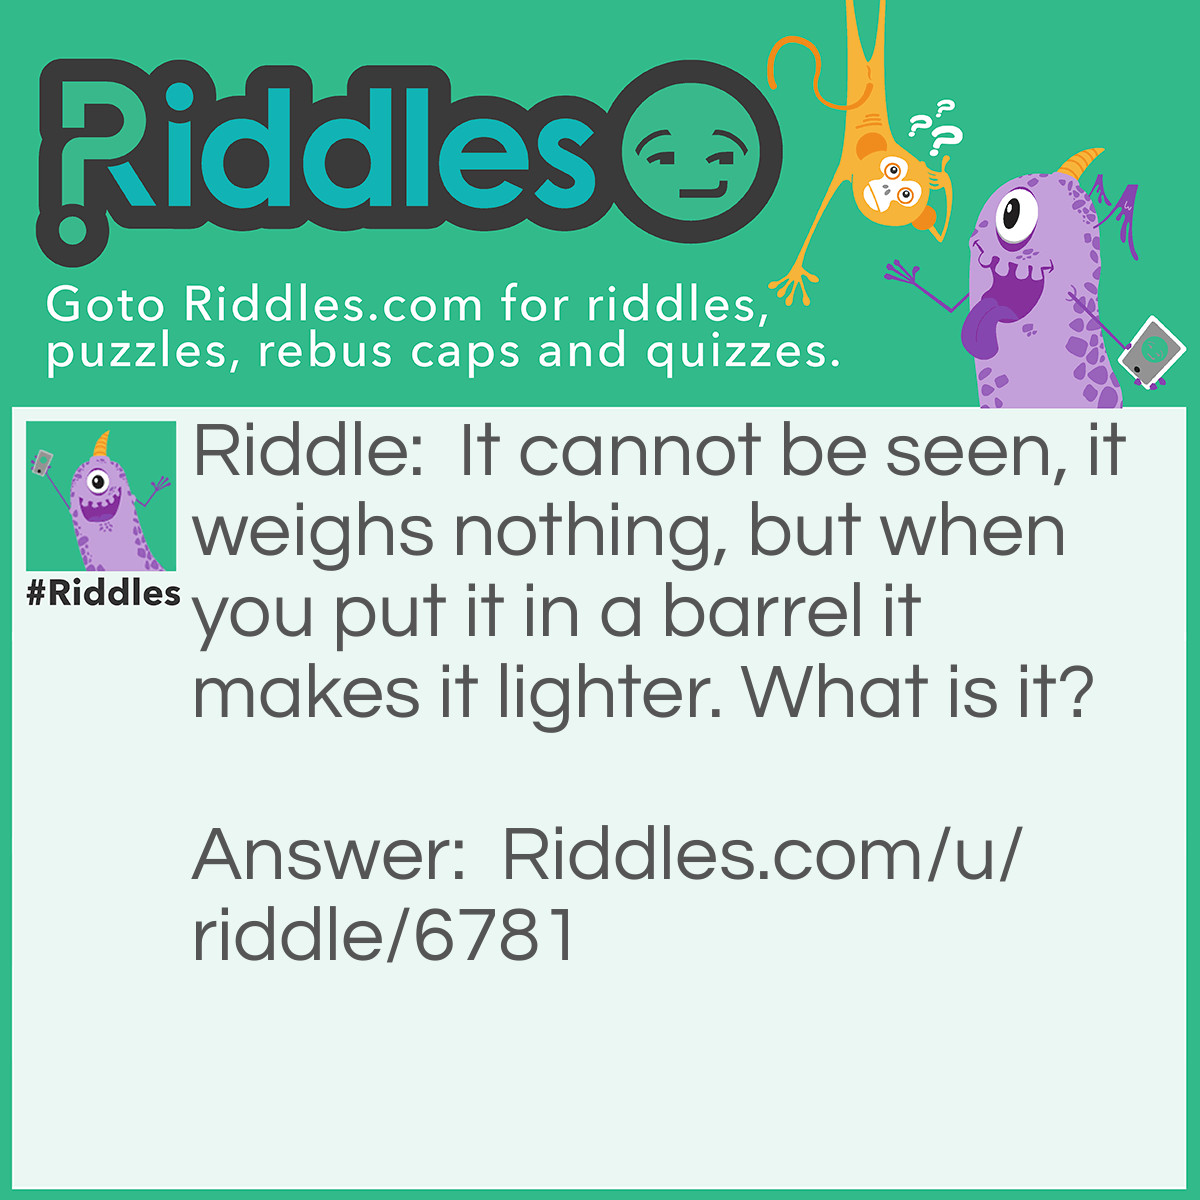 Riddle: It cannot be seen, it weighs nothing, but when you put it in a barrel it makes it lighter. What is it? Answer: A hole.